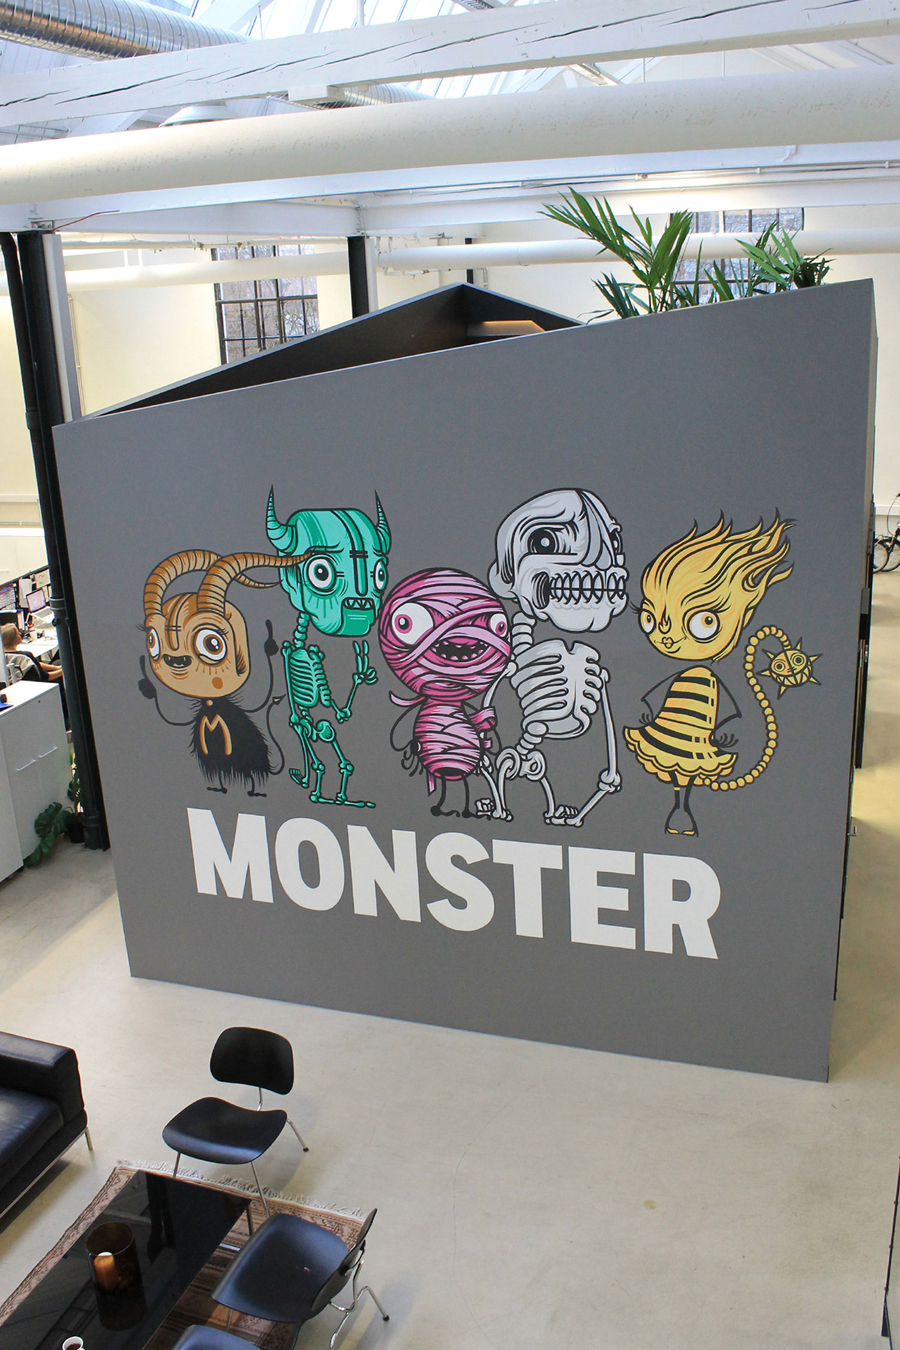 Large format vinyl sticker illustrated by Drew Millward designed by The Metric System for Norwegian production company Monster